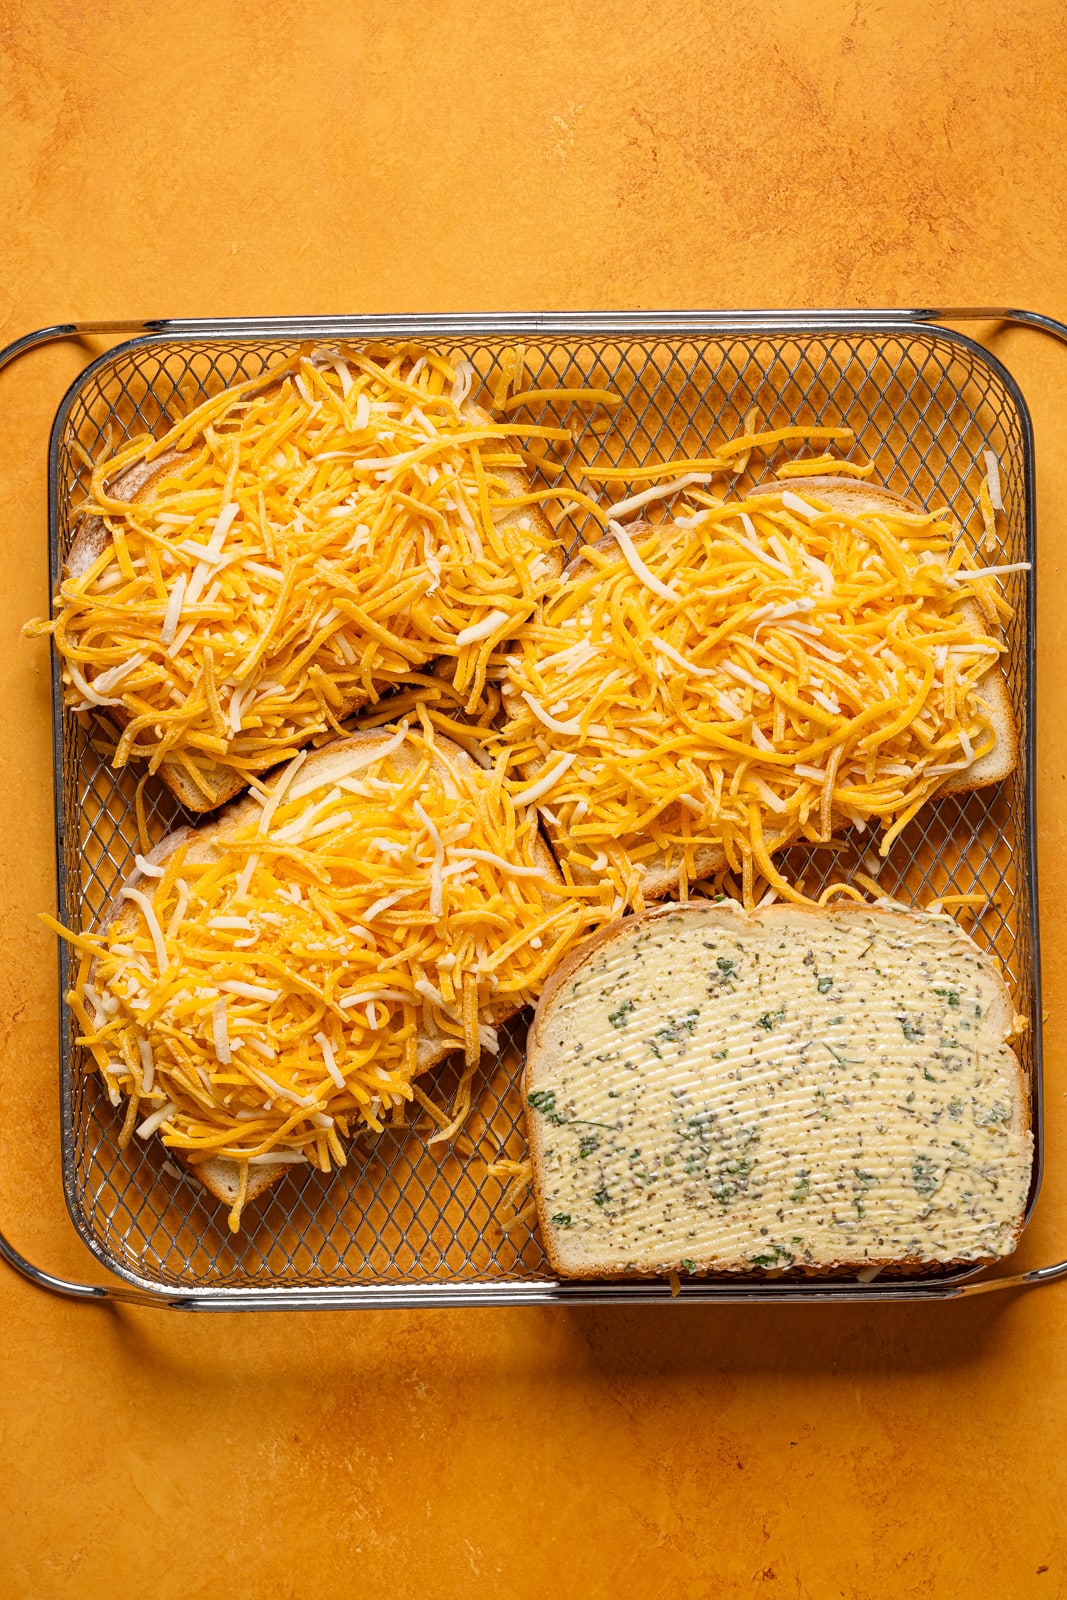 Shredded cheese on slices of bread with herb butter in an Air Fryer basket.